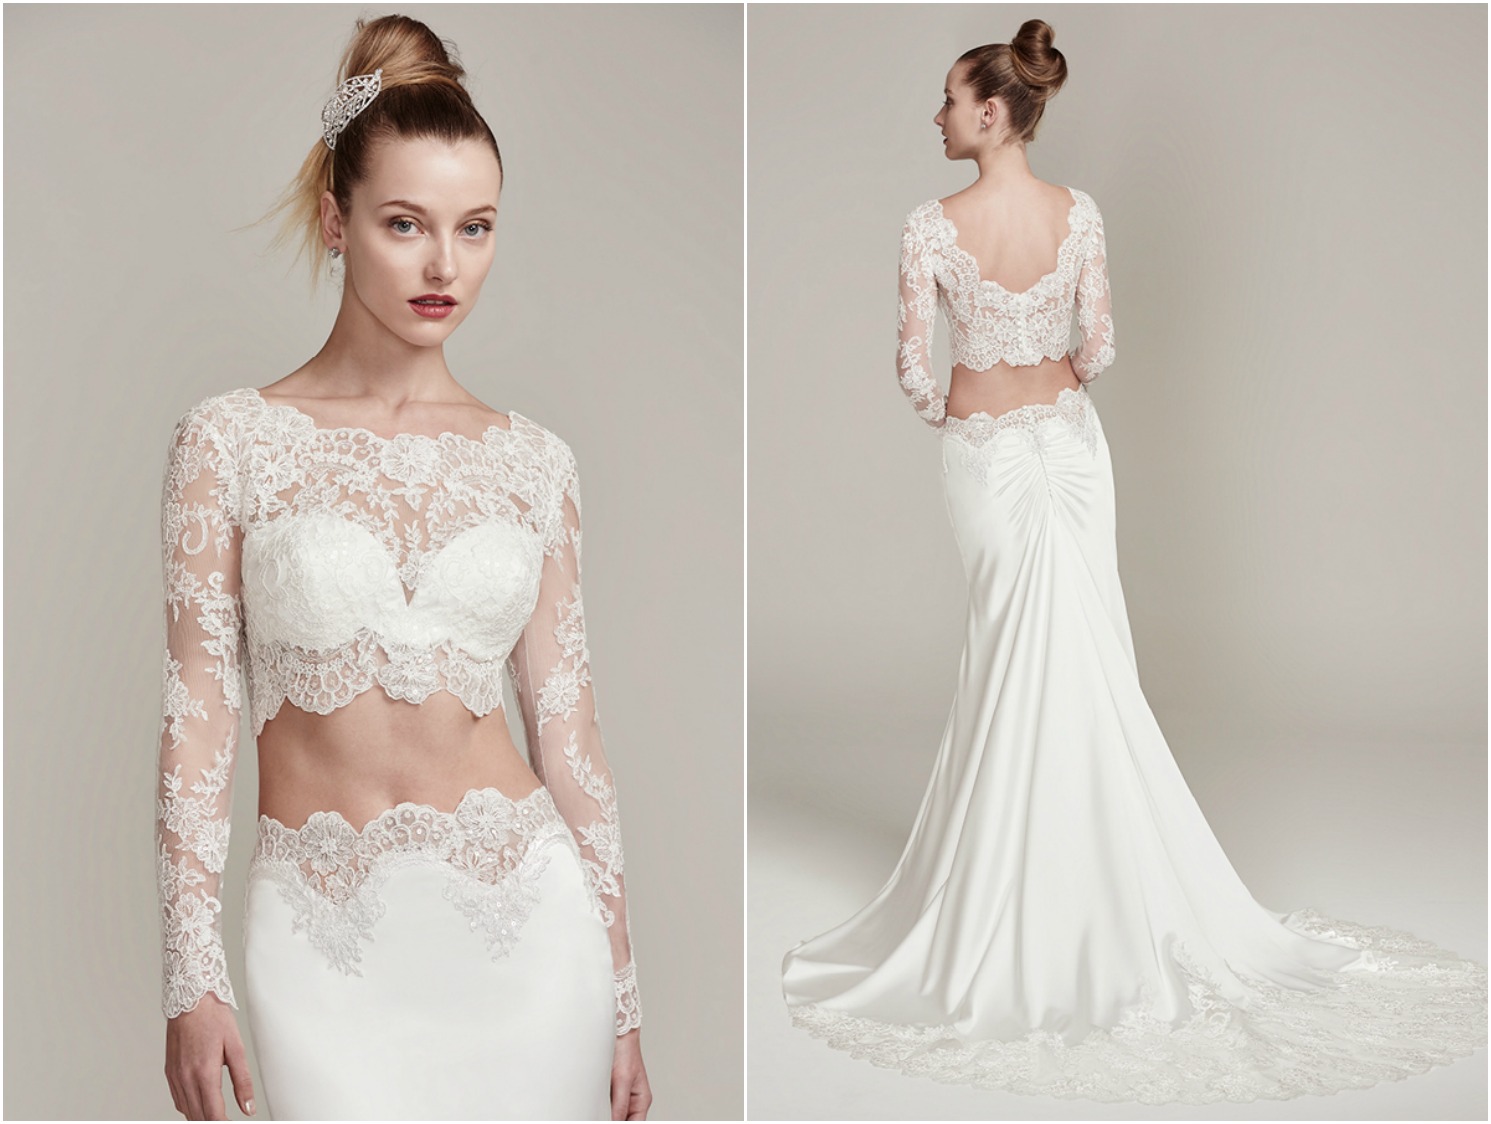 An illusion lace crop top is accented with a stunning scalloped lace bateau neckline and long sleeves. The matching Belize satin sheath skirt with lace trim creates a fashion-forward two-piece wedding dress style.   Complete with a detailed illusion lace trimmed train and ruching. Finished with covered buttons and zipper closure. 

<a href="https://www.maggiesottero.com/sottero-and-midgley/fiona/9853" target="_blank">Sottero &amp; Midgley</a>